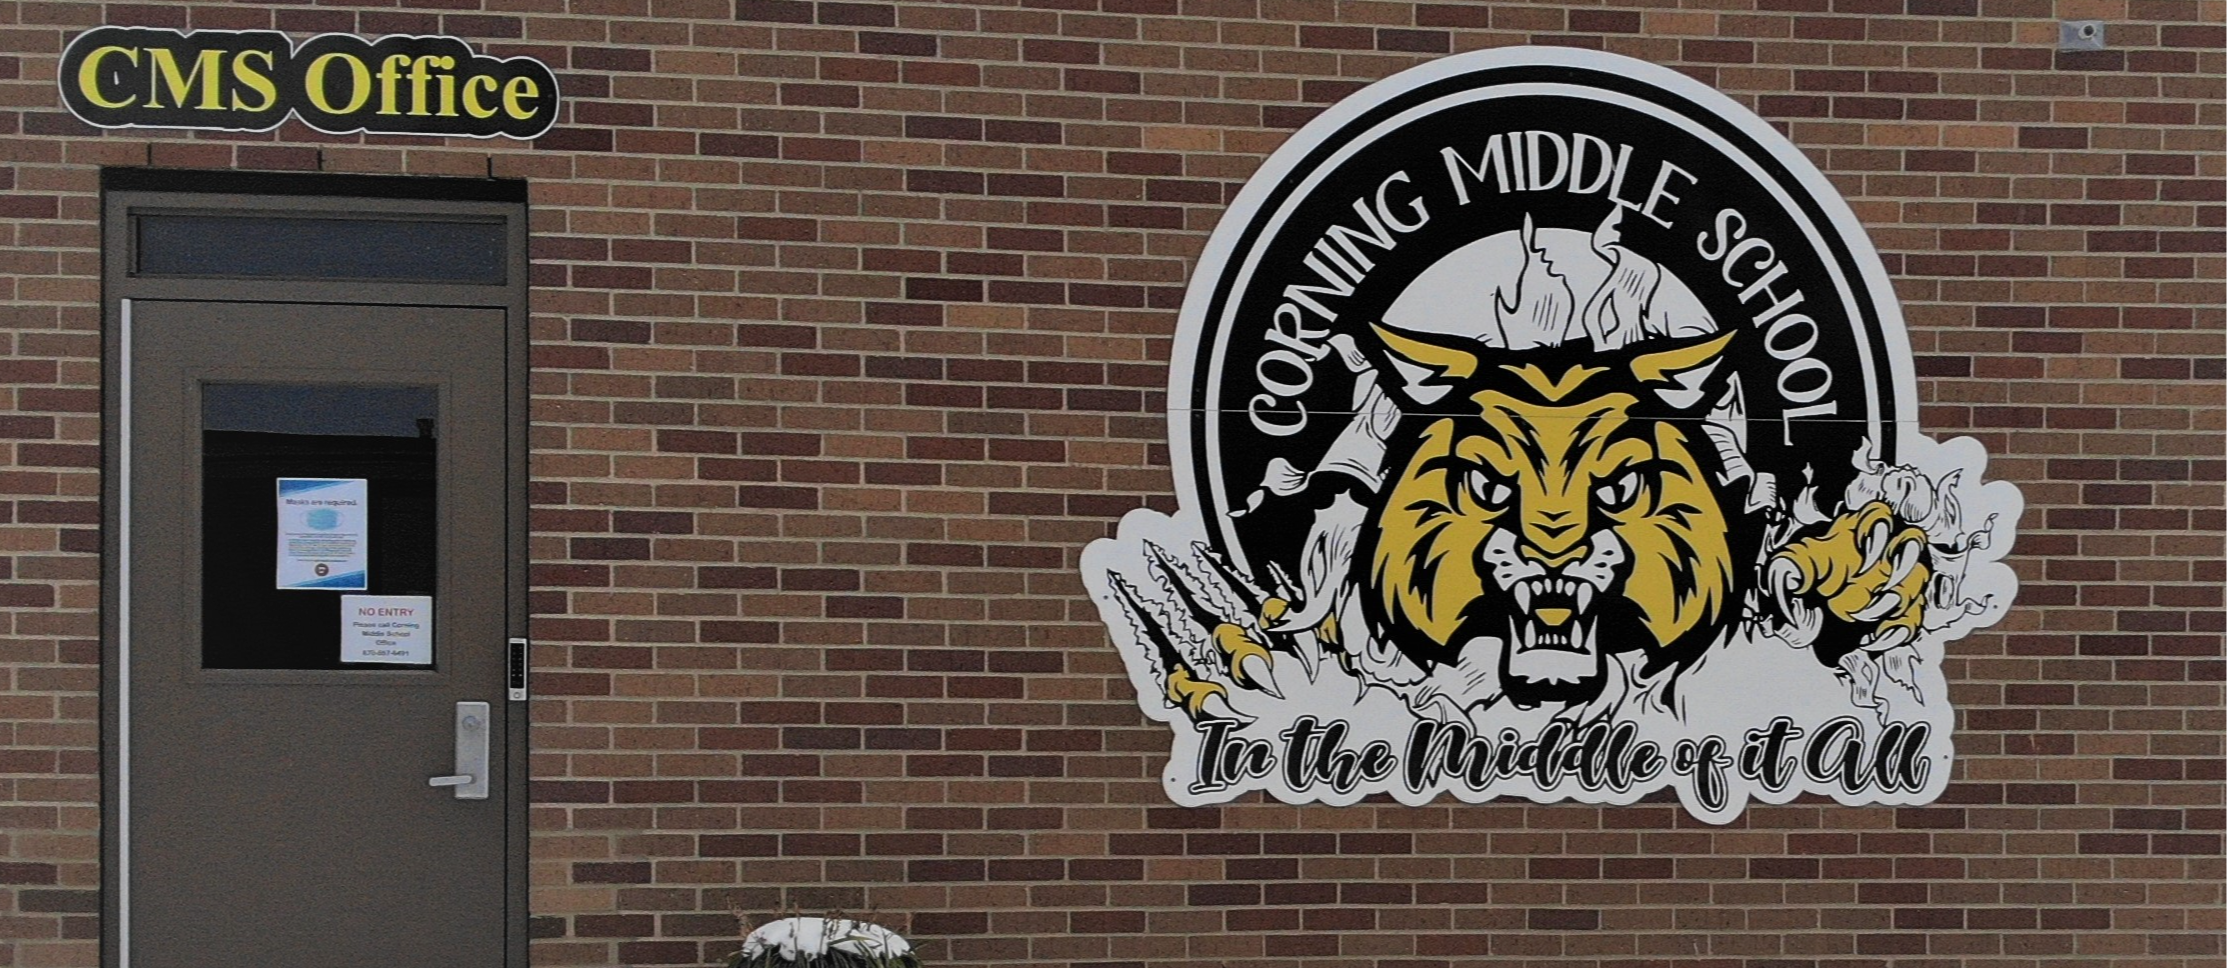 Corning Middle School in the middle of it all with yellow bobcat on side of brick building